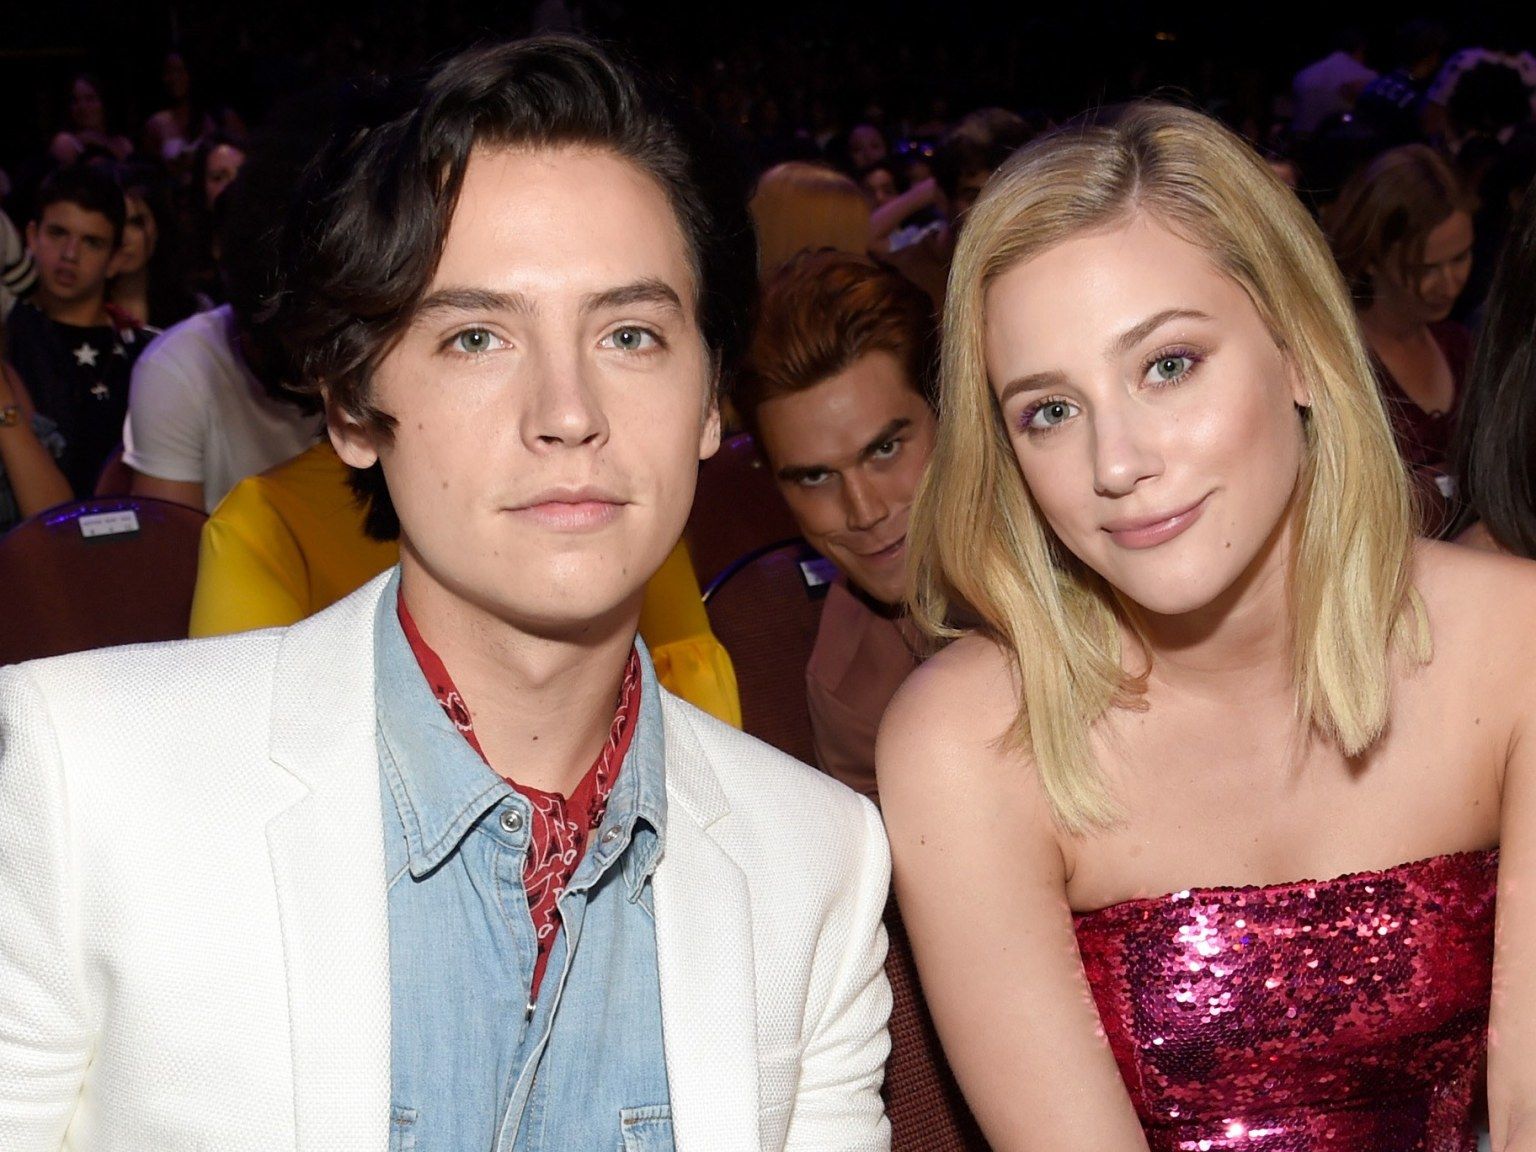 Cole Sprouse Posted His First Photo of Himself and Lili Reinhart